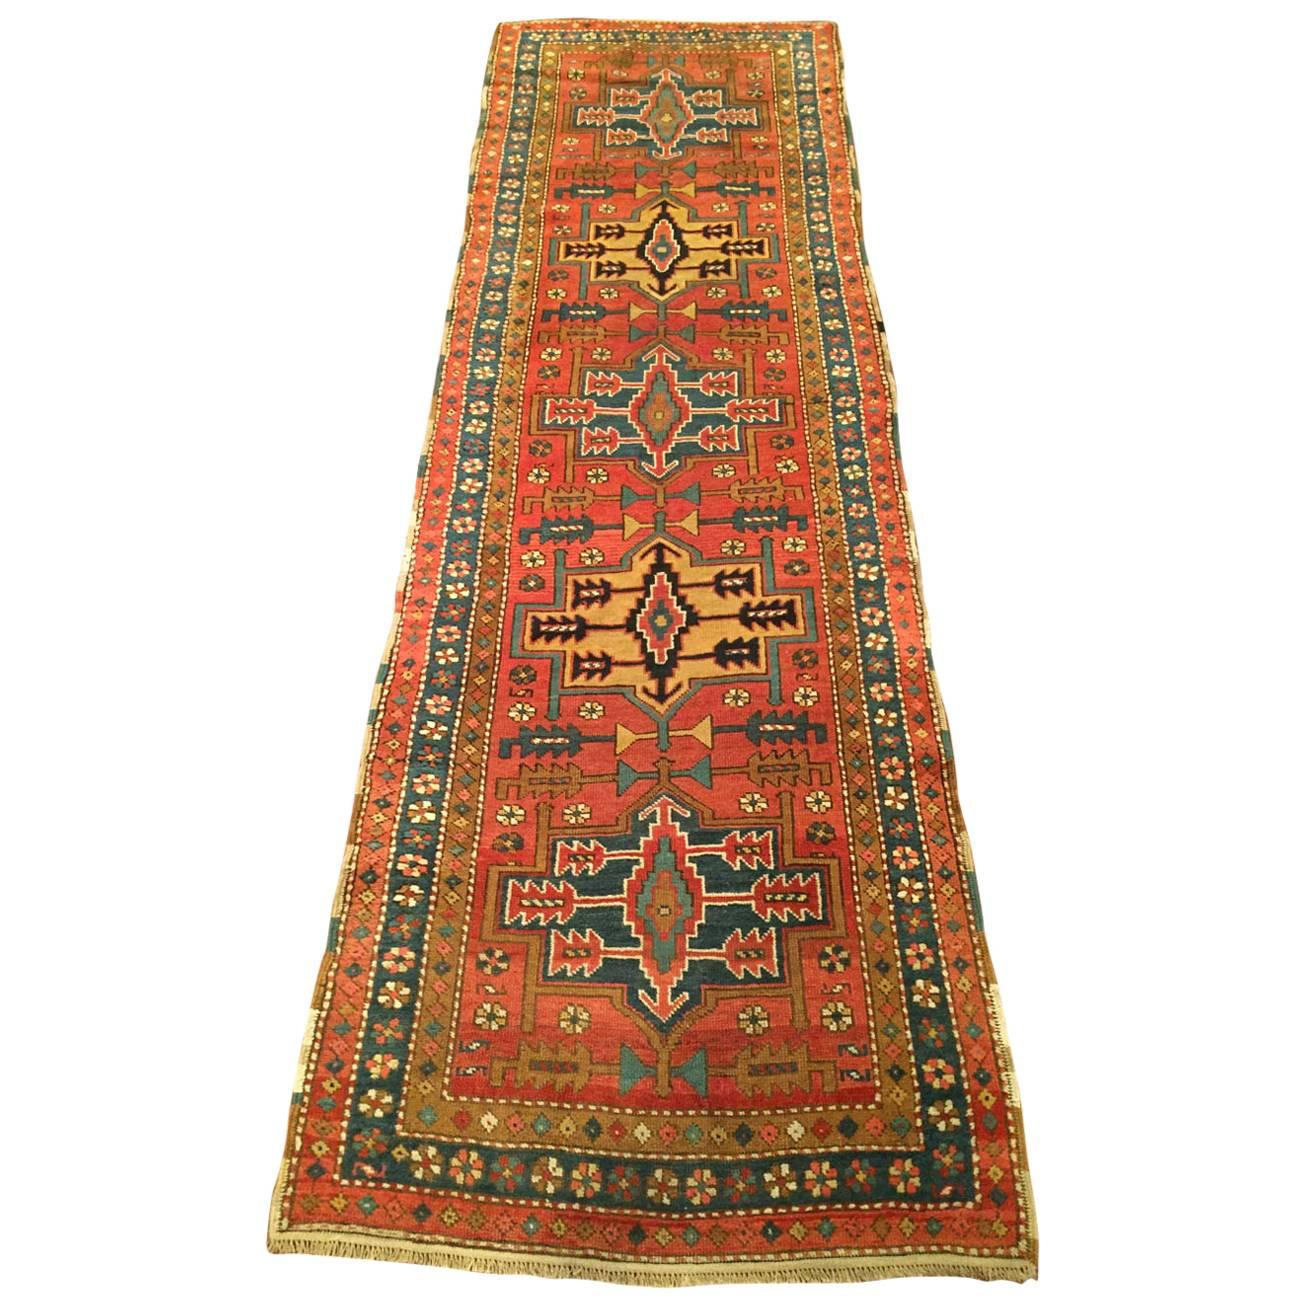 Early 20th Century Persian Northwest Persia Runner Rug For Sale